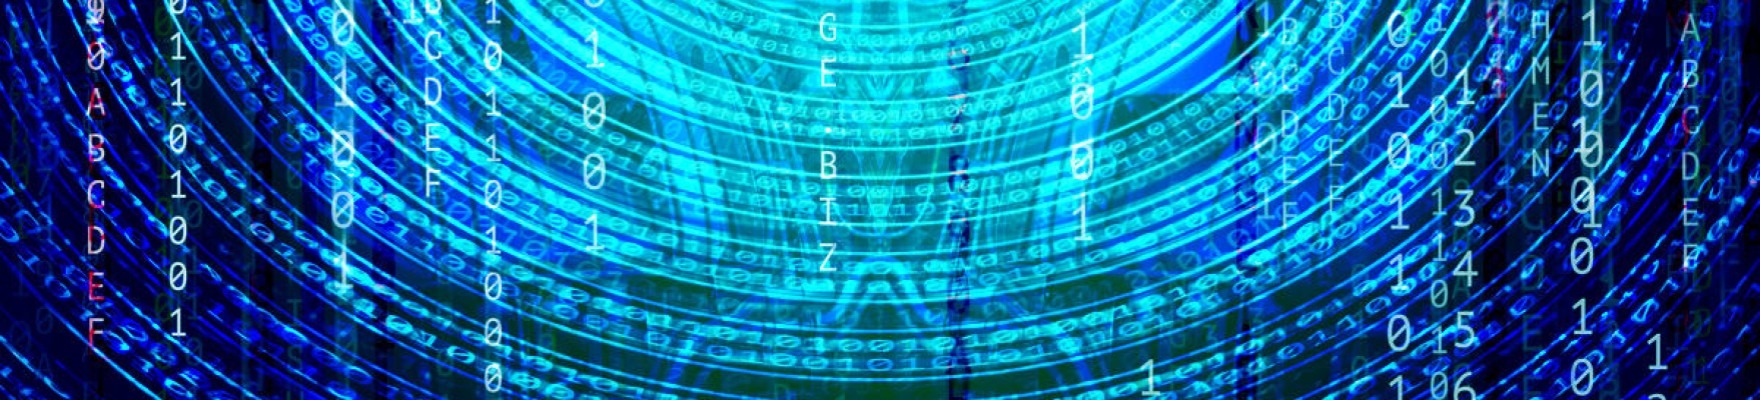 Image of blue futuristic digital numbers and lines